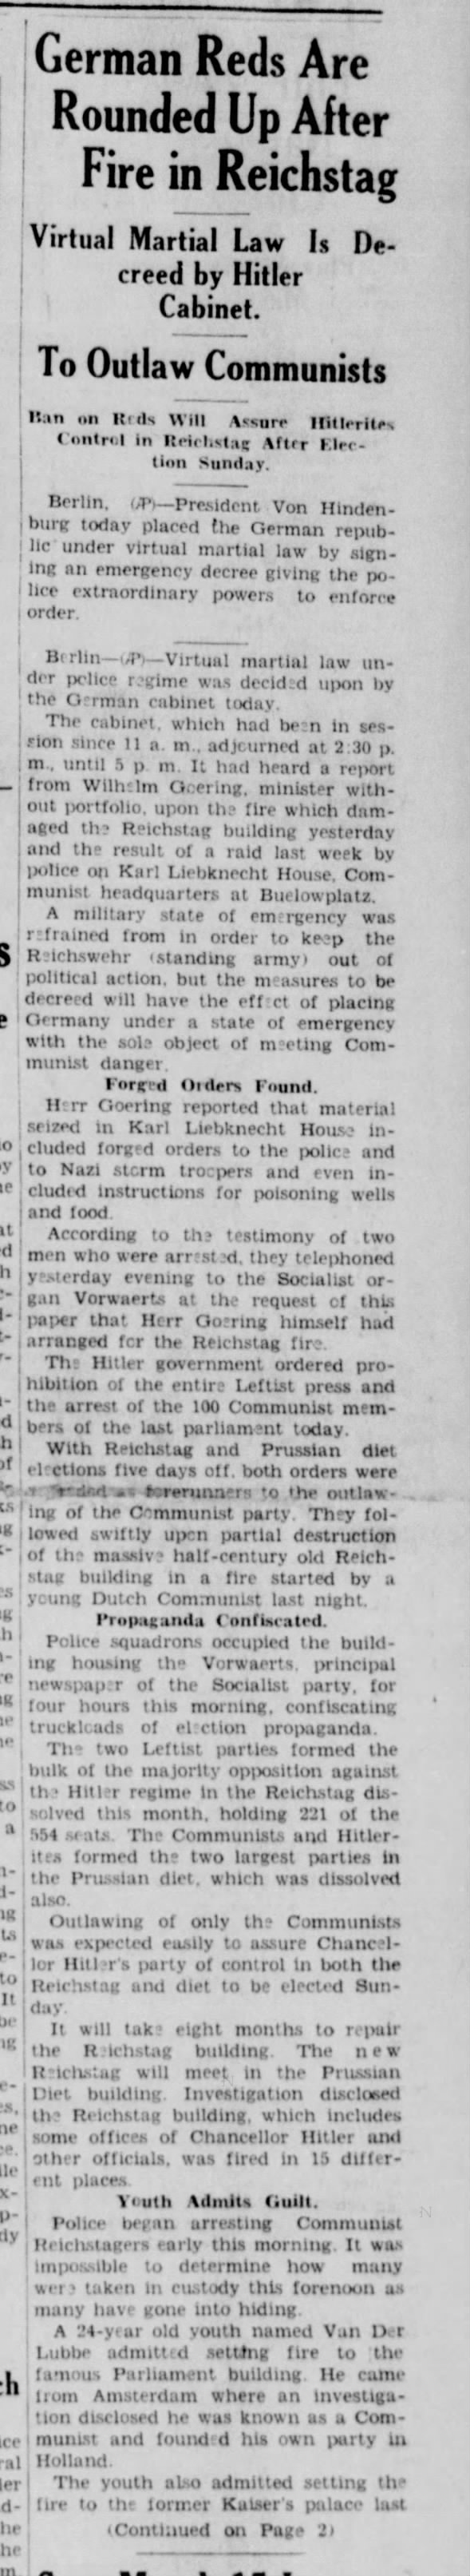 German Reds Are Rounded Up After Fire In Reichstag